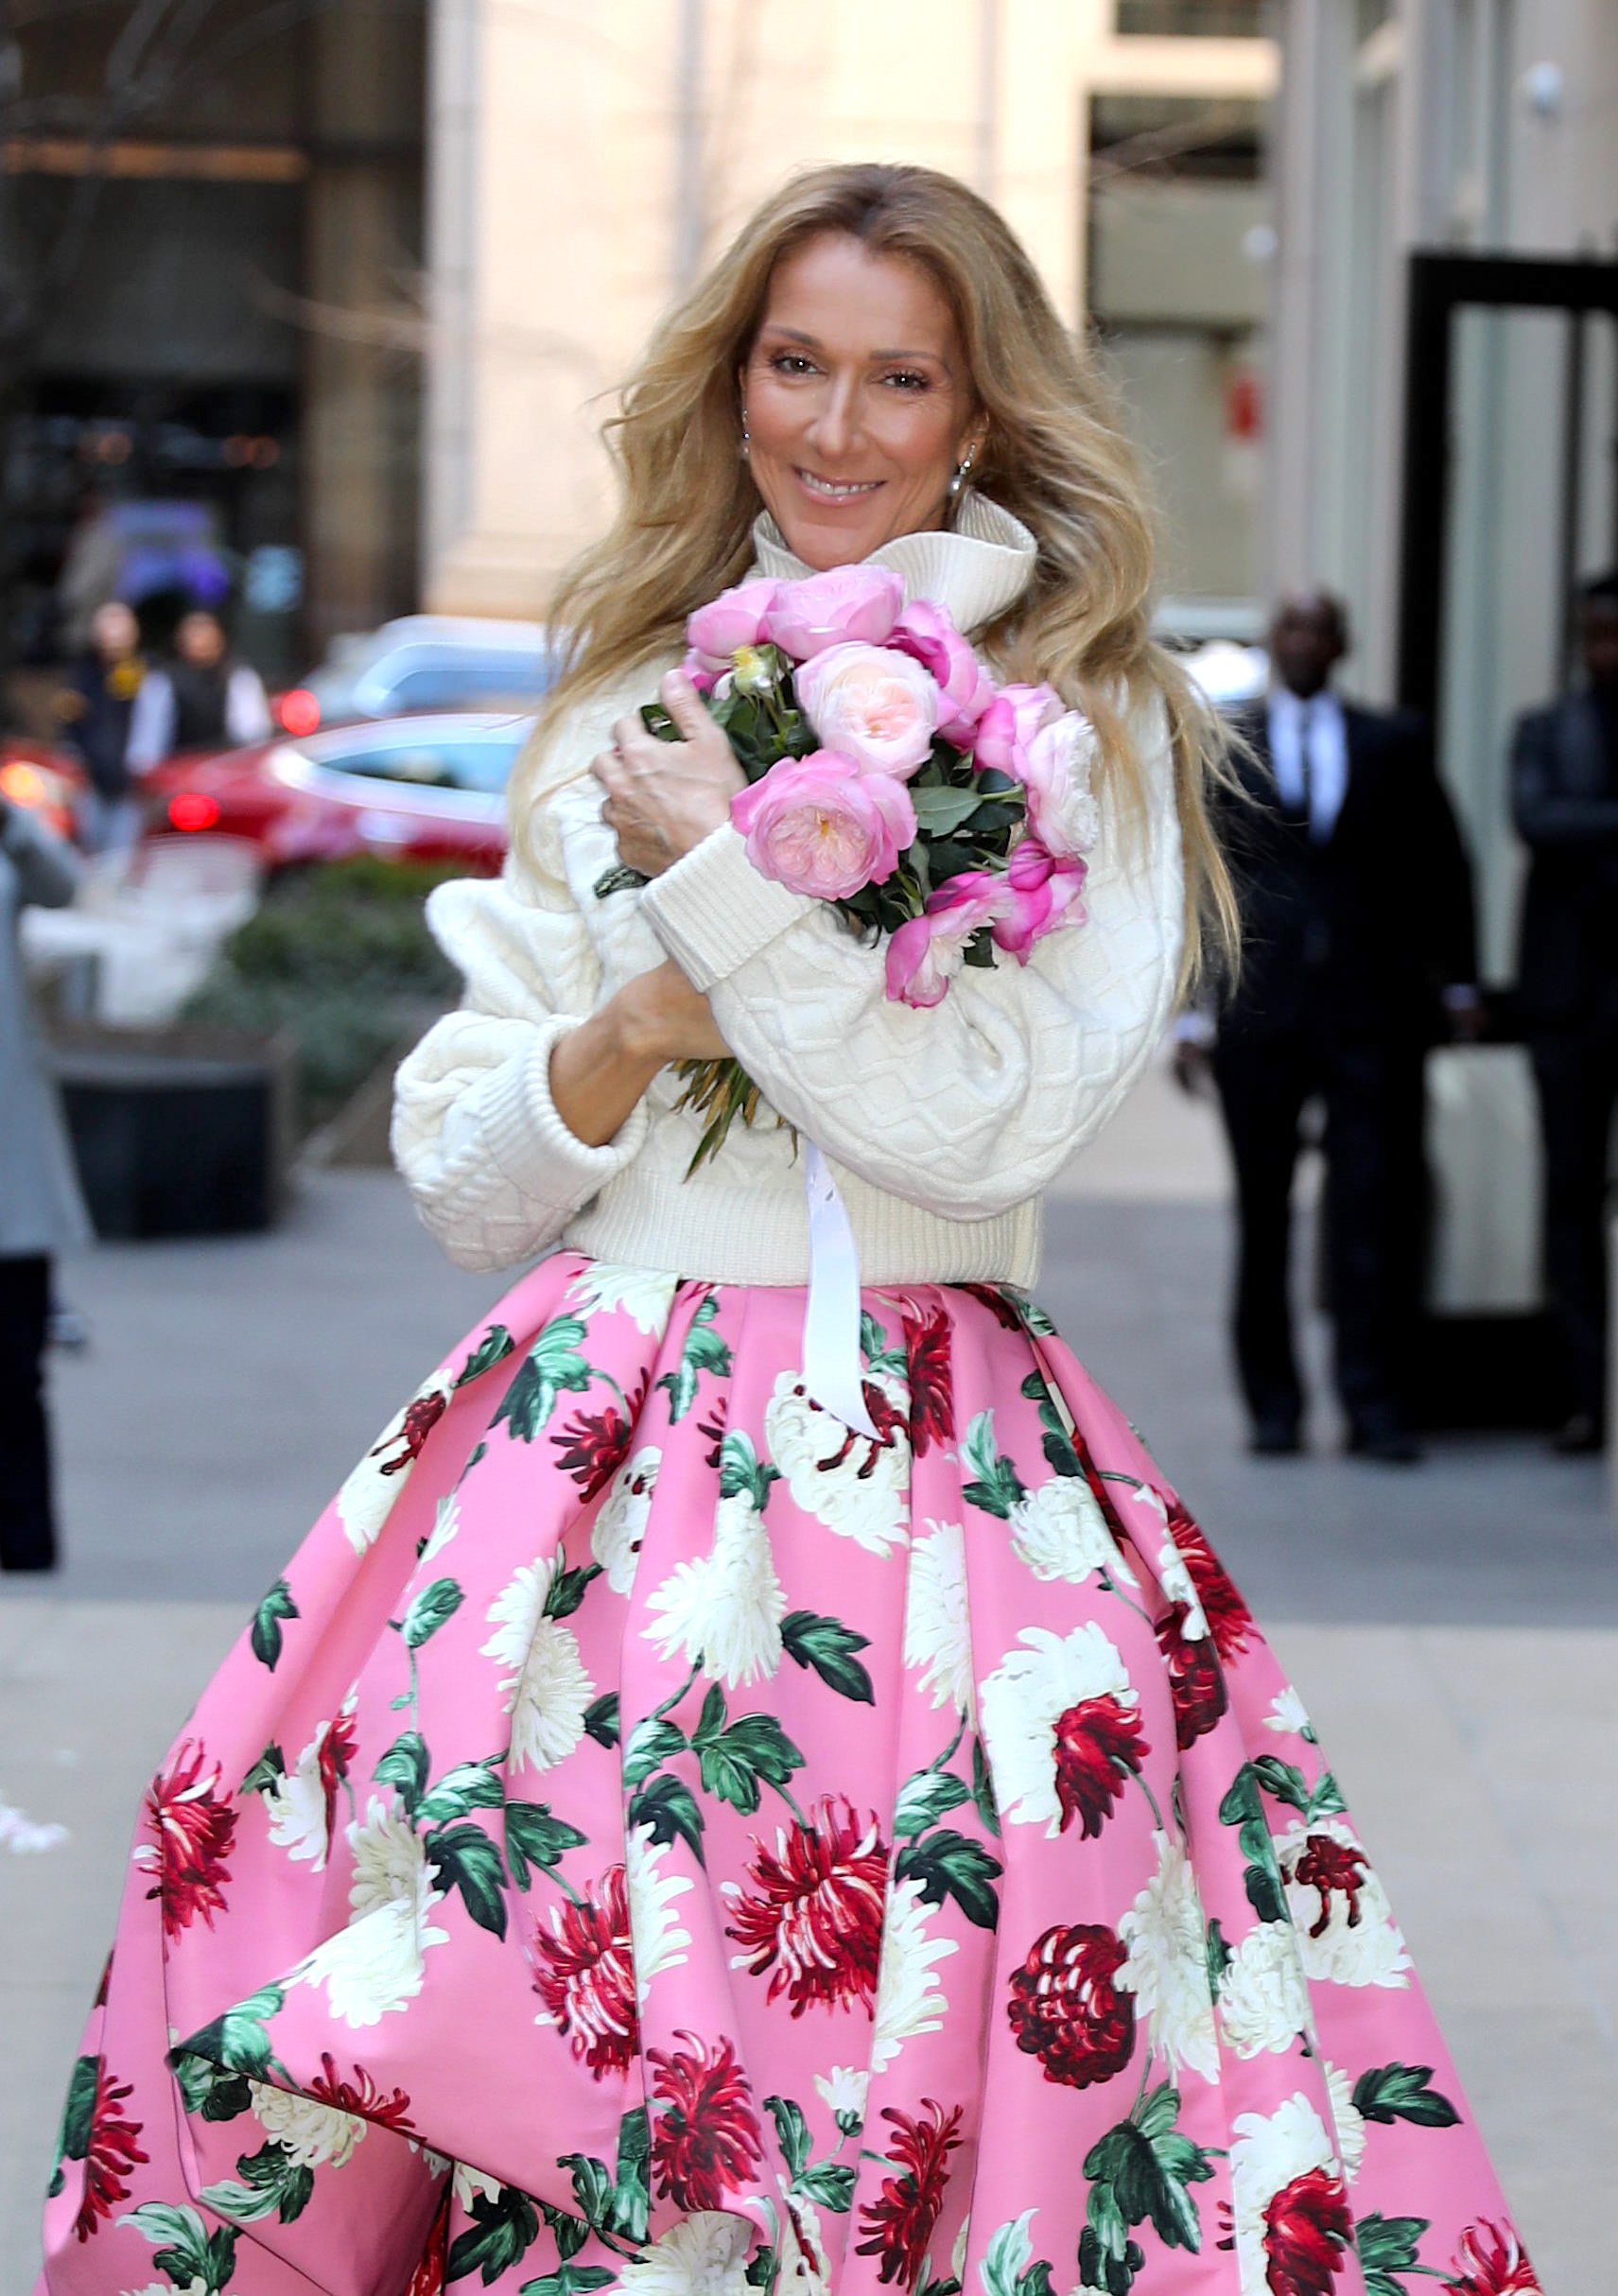 Celine Dion seen walking on the streets of New York holding flowers, 2020 | Photo: Getty Images 